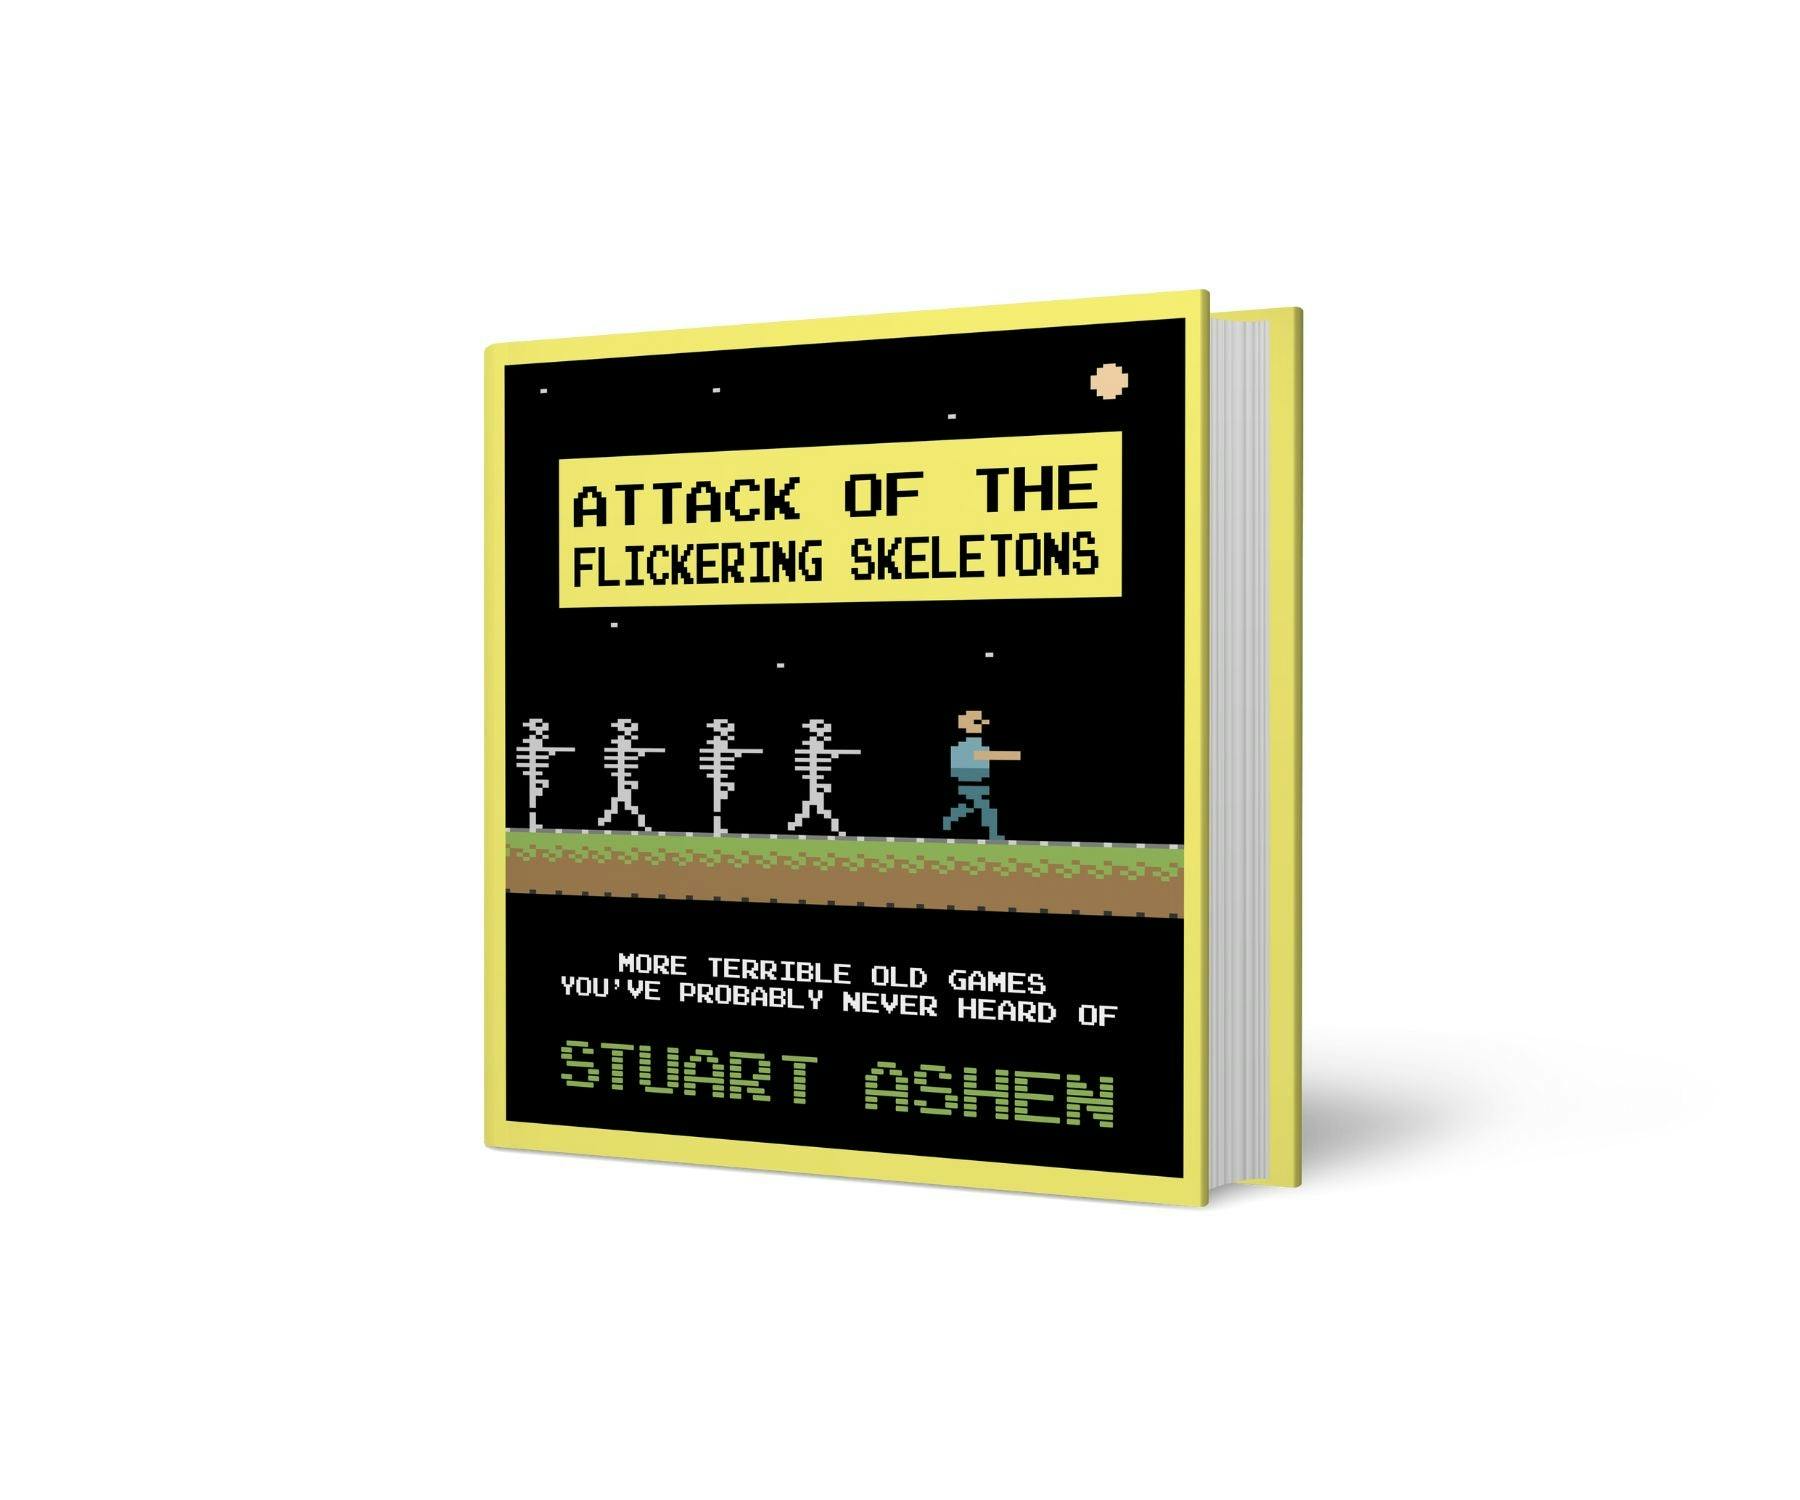 Attach of the Flickering Skeletons by Stuart Ashen